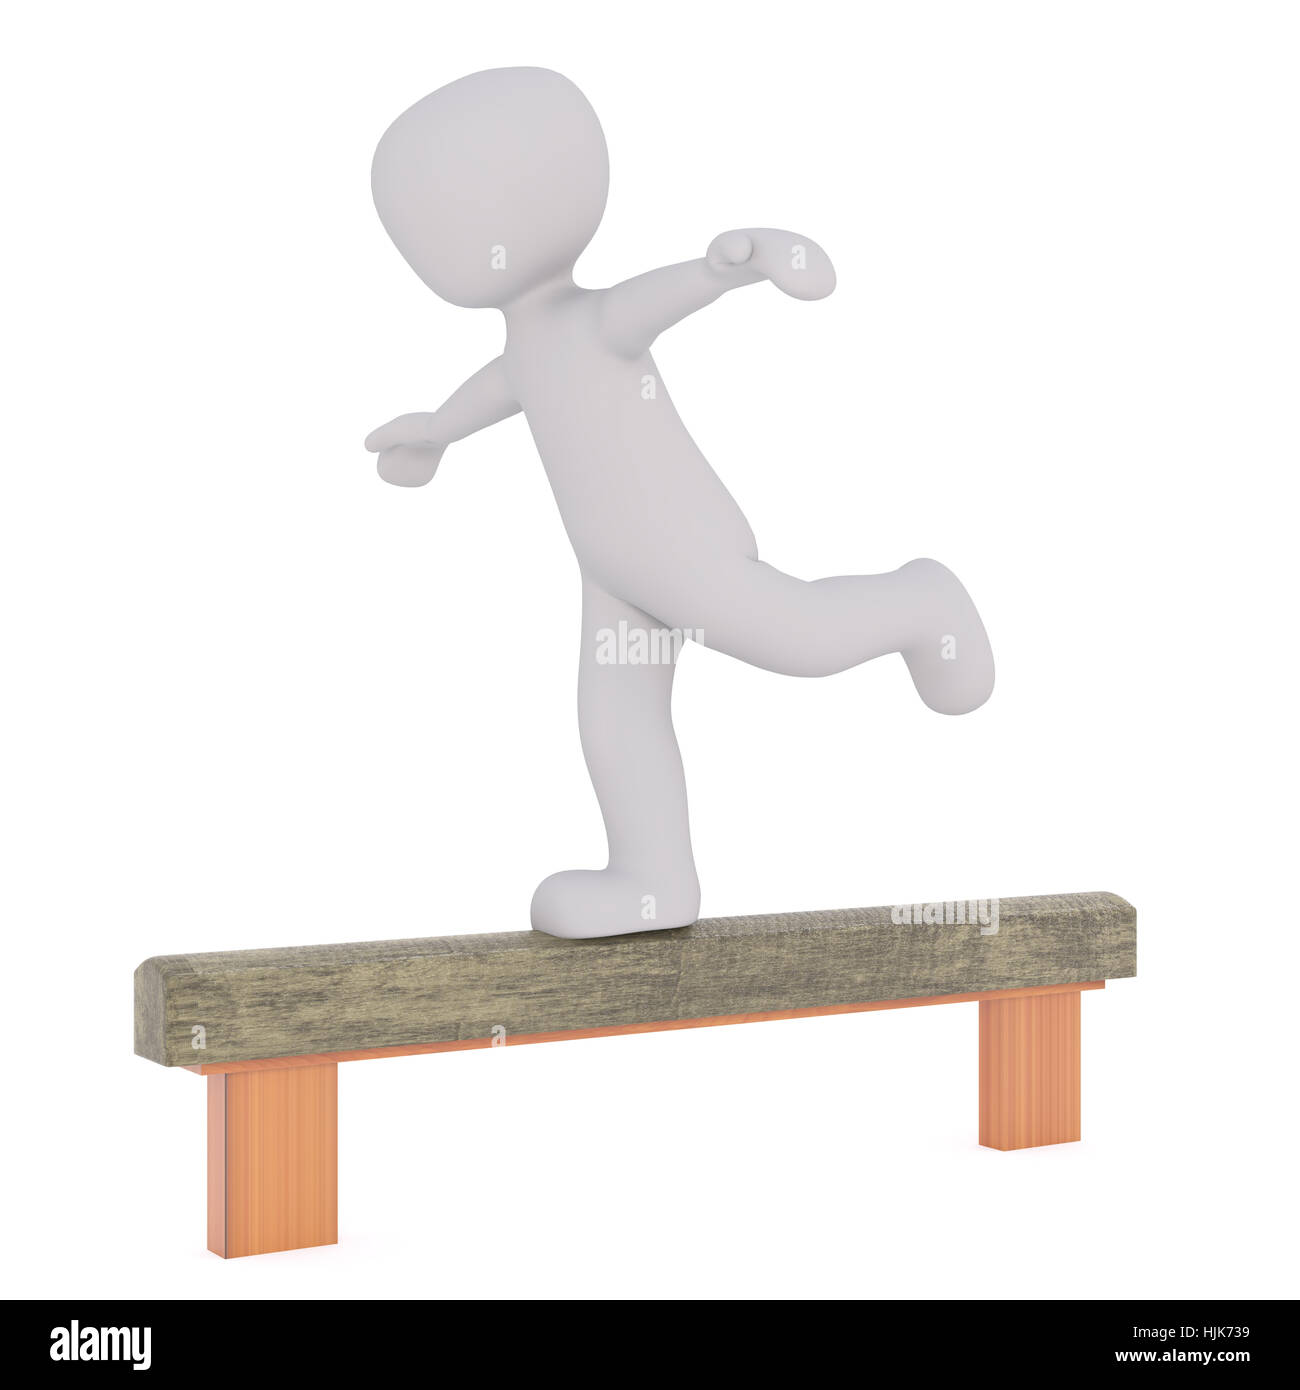 3d Rendering of Cartoon Character Competing in Balance Beam Event During  Gymnastics Competition in front of White Background Stock Photo - Alamy